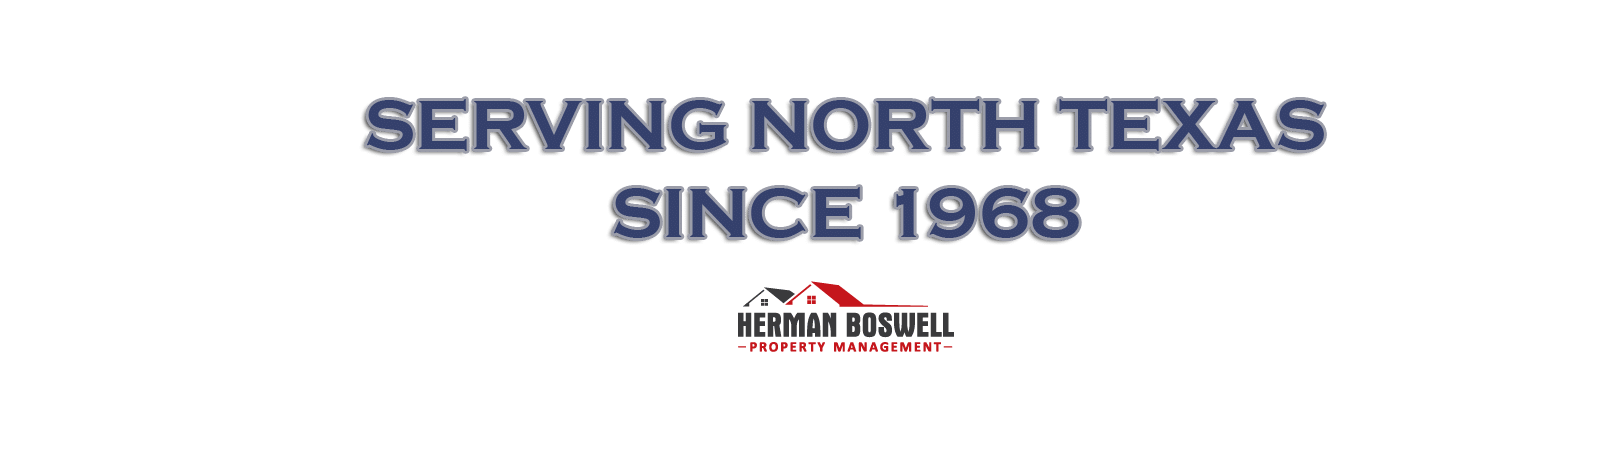 Serving North Texas since 1968